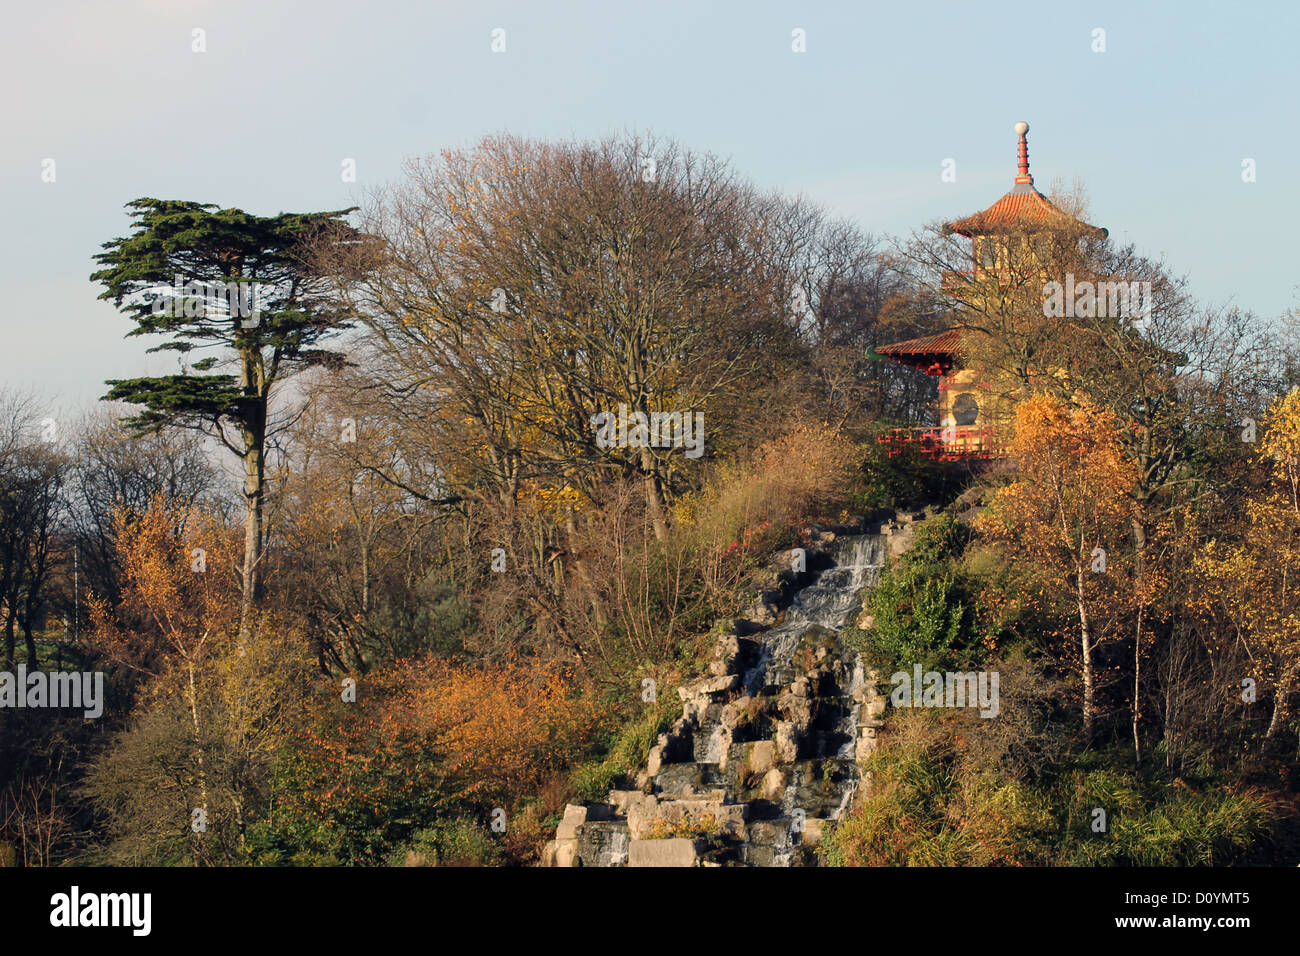 Scenic view of traditional Japanese pagoda and waterfall, Peasholm Park, Scarborough, England. Stock Photo